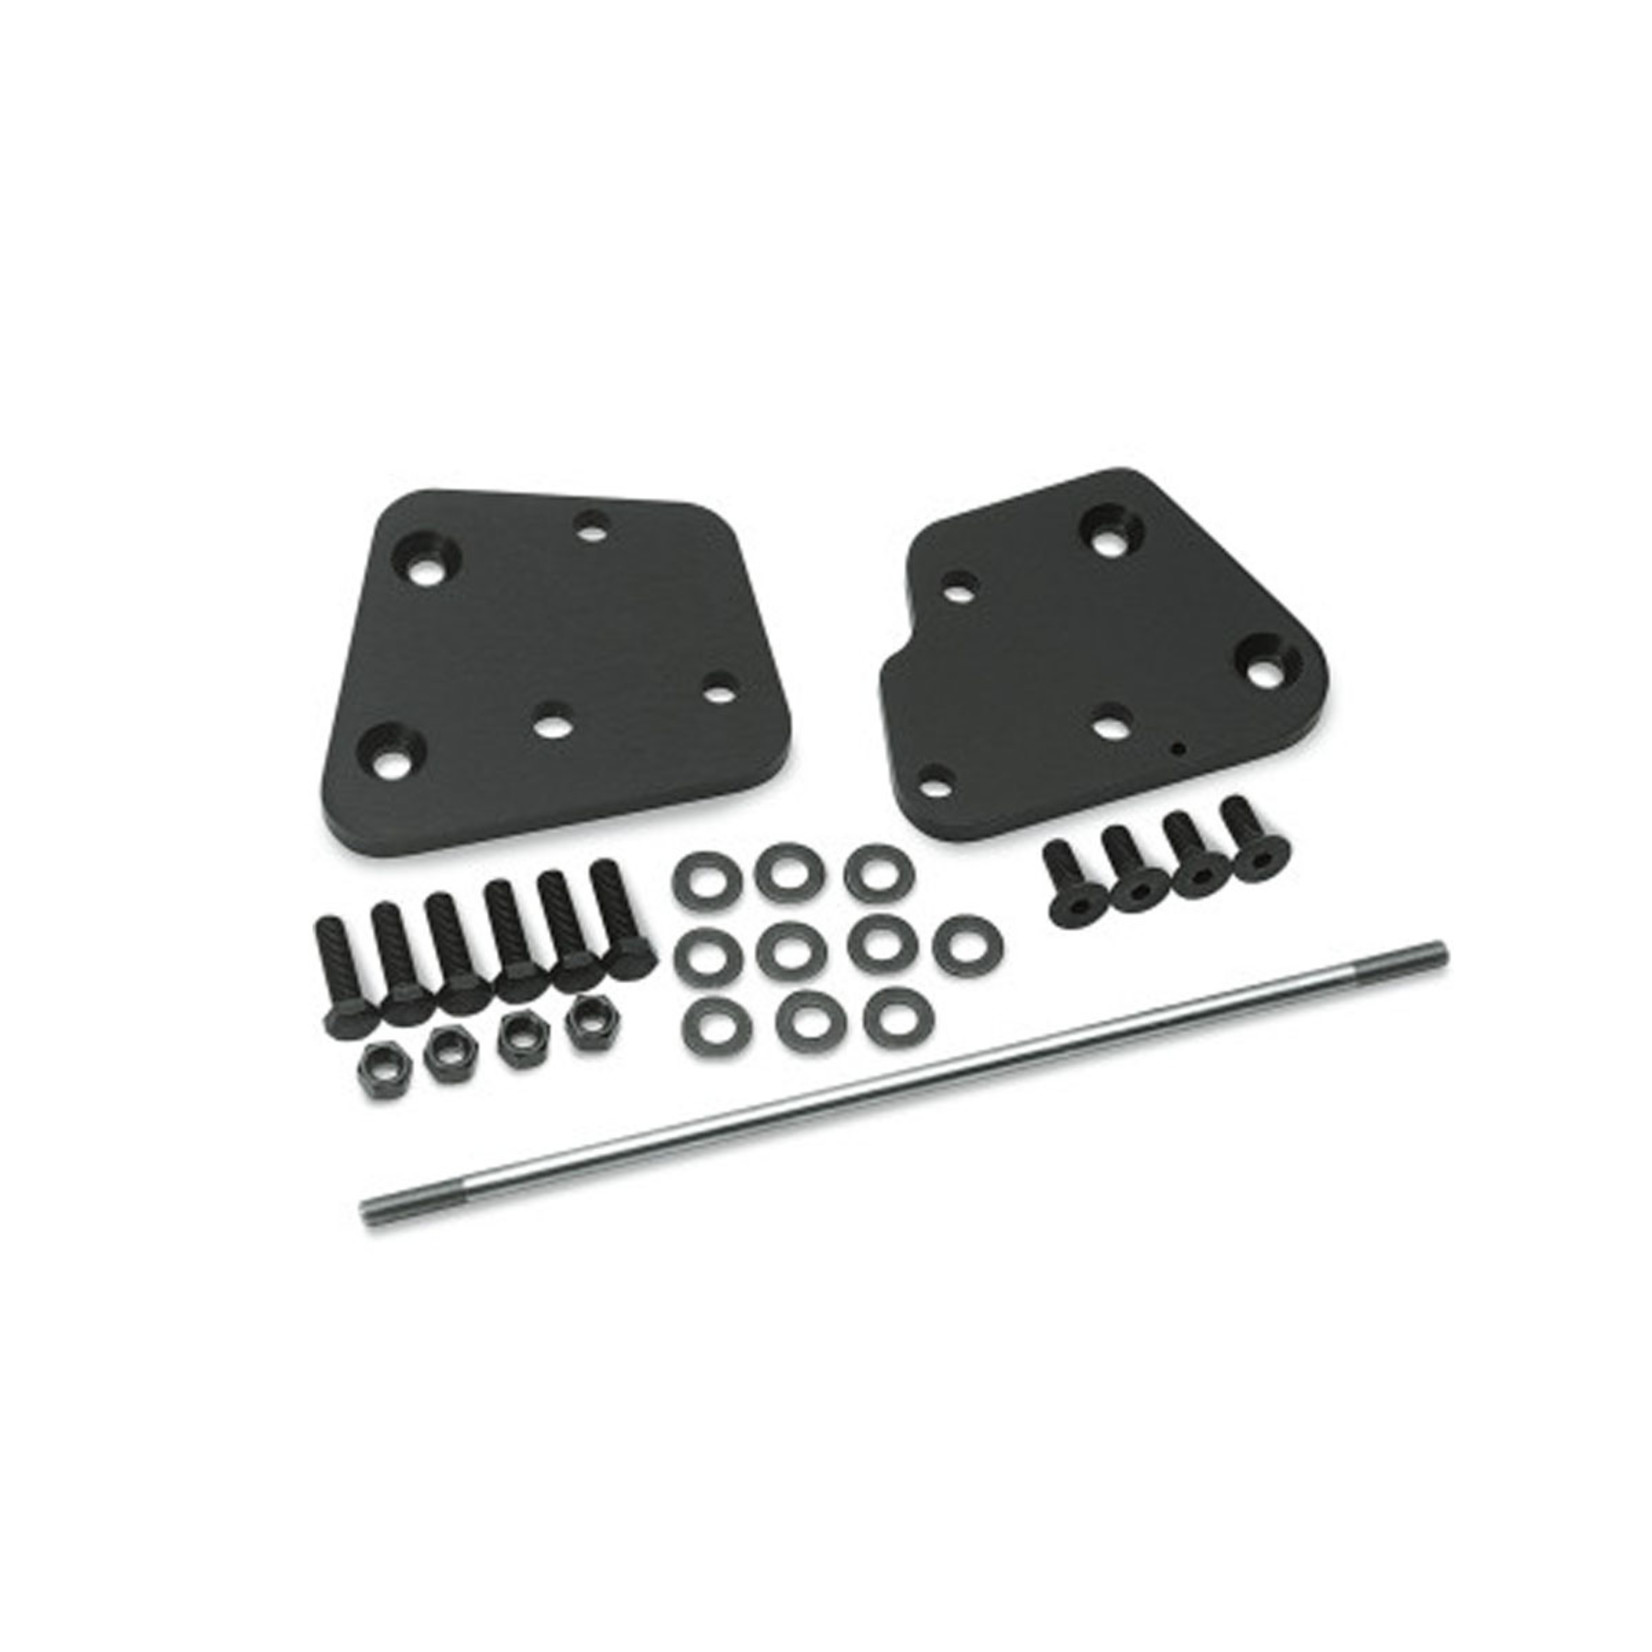 CYCLE VISIONS CYCLE VISIONS GO-FORWARD 2" FLOORBOARD EXTENSION KIT - '00-'15 FLST